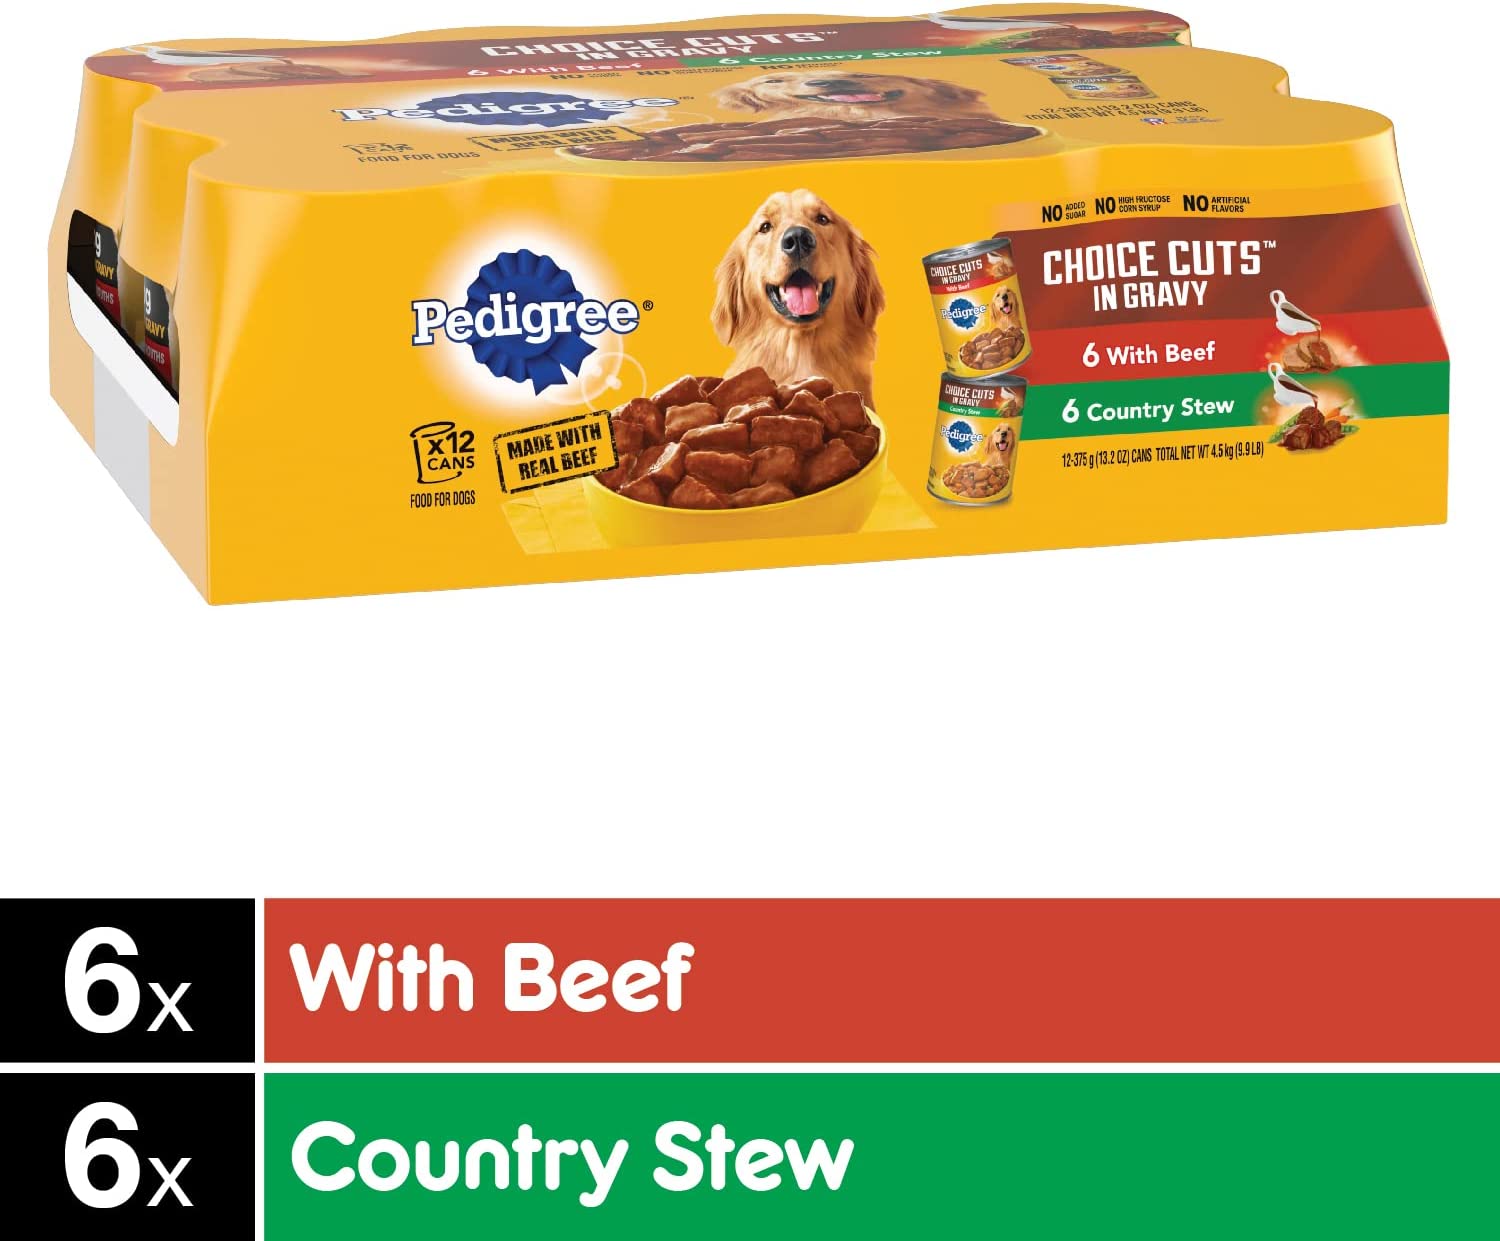 12pk 13.2oz  Pedigree Choice Cuts in Gravy Canned Dog Food (Beef, Country Stew